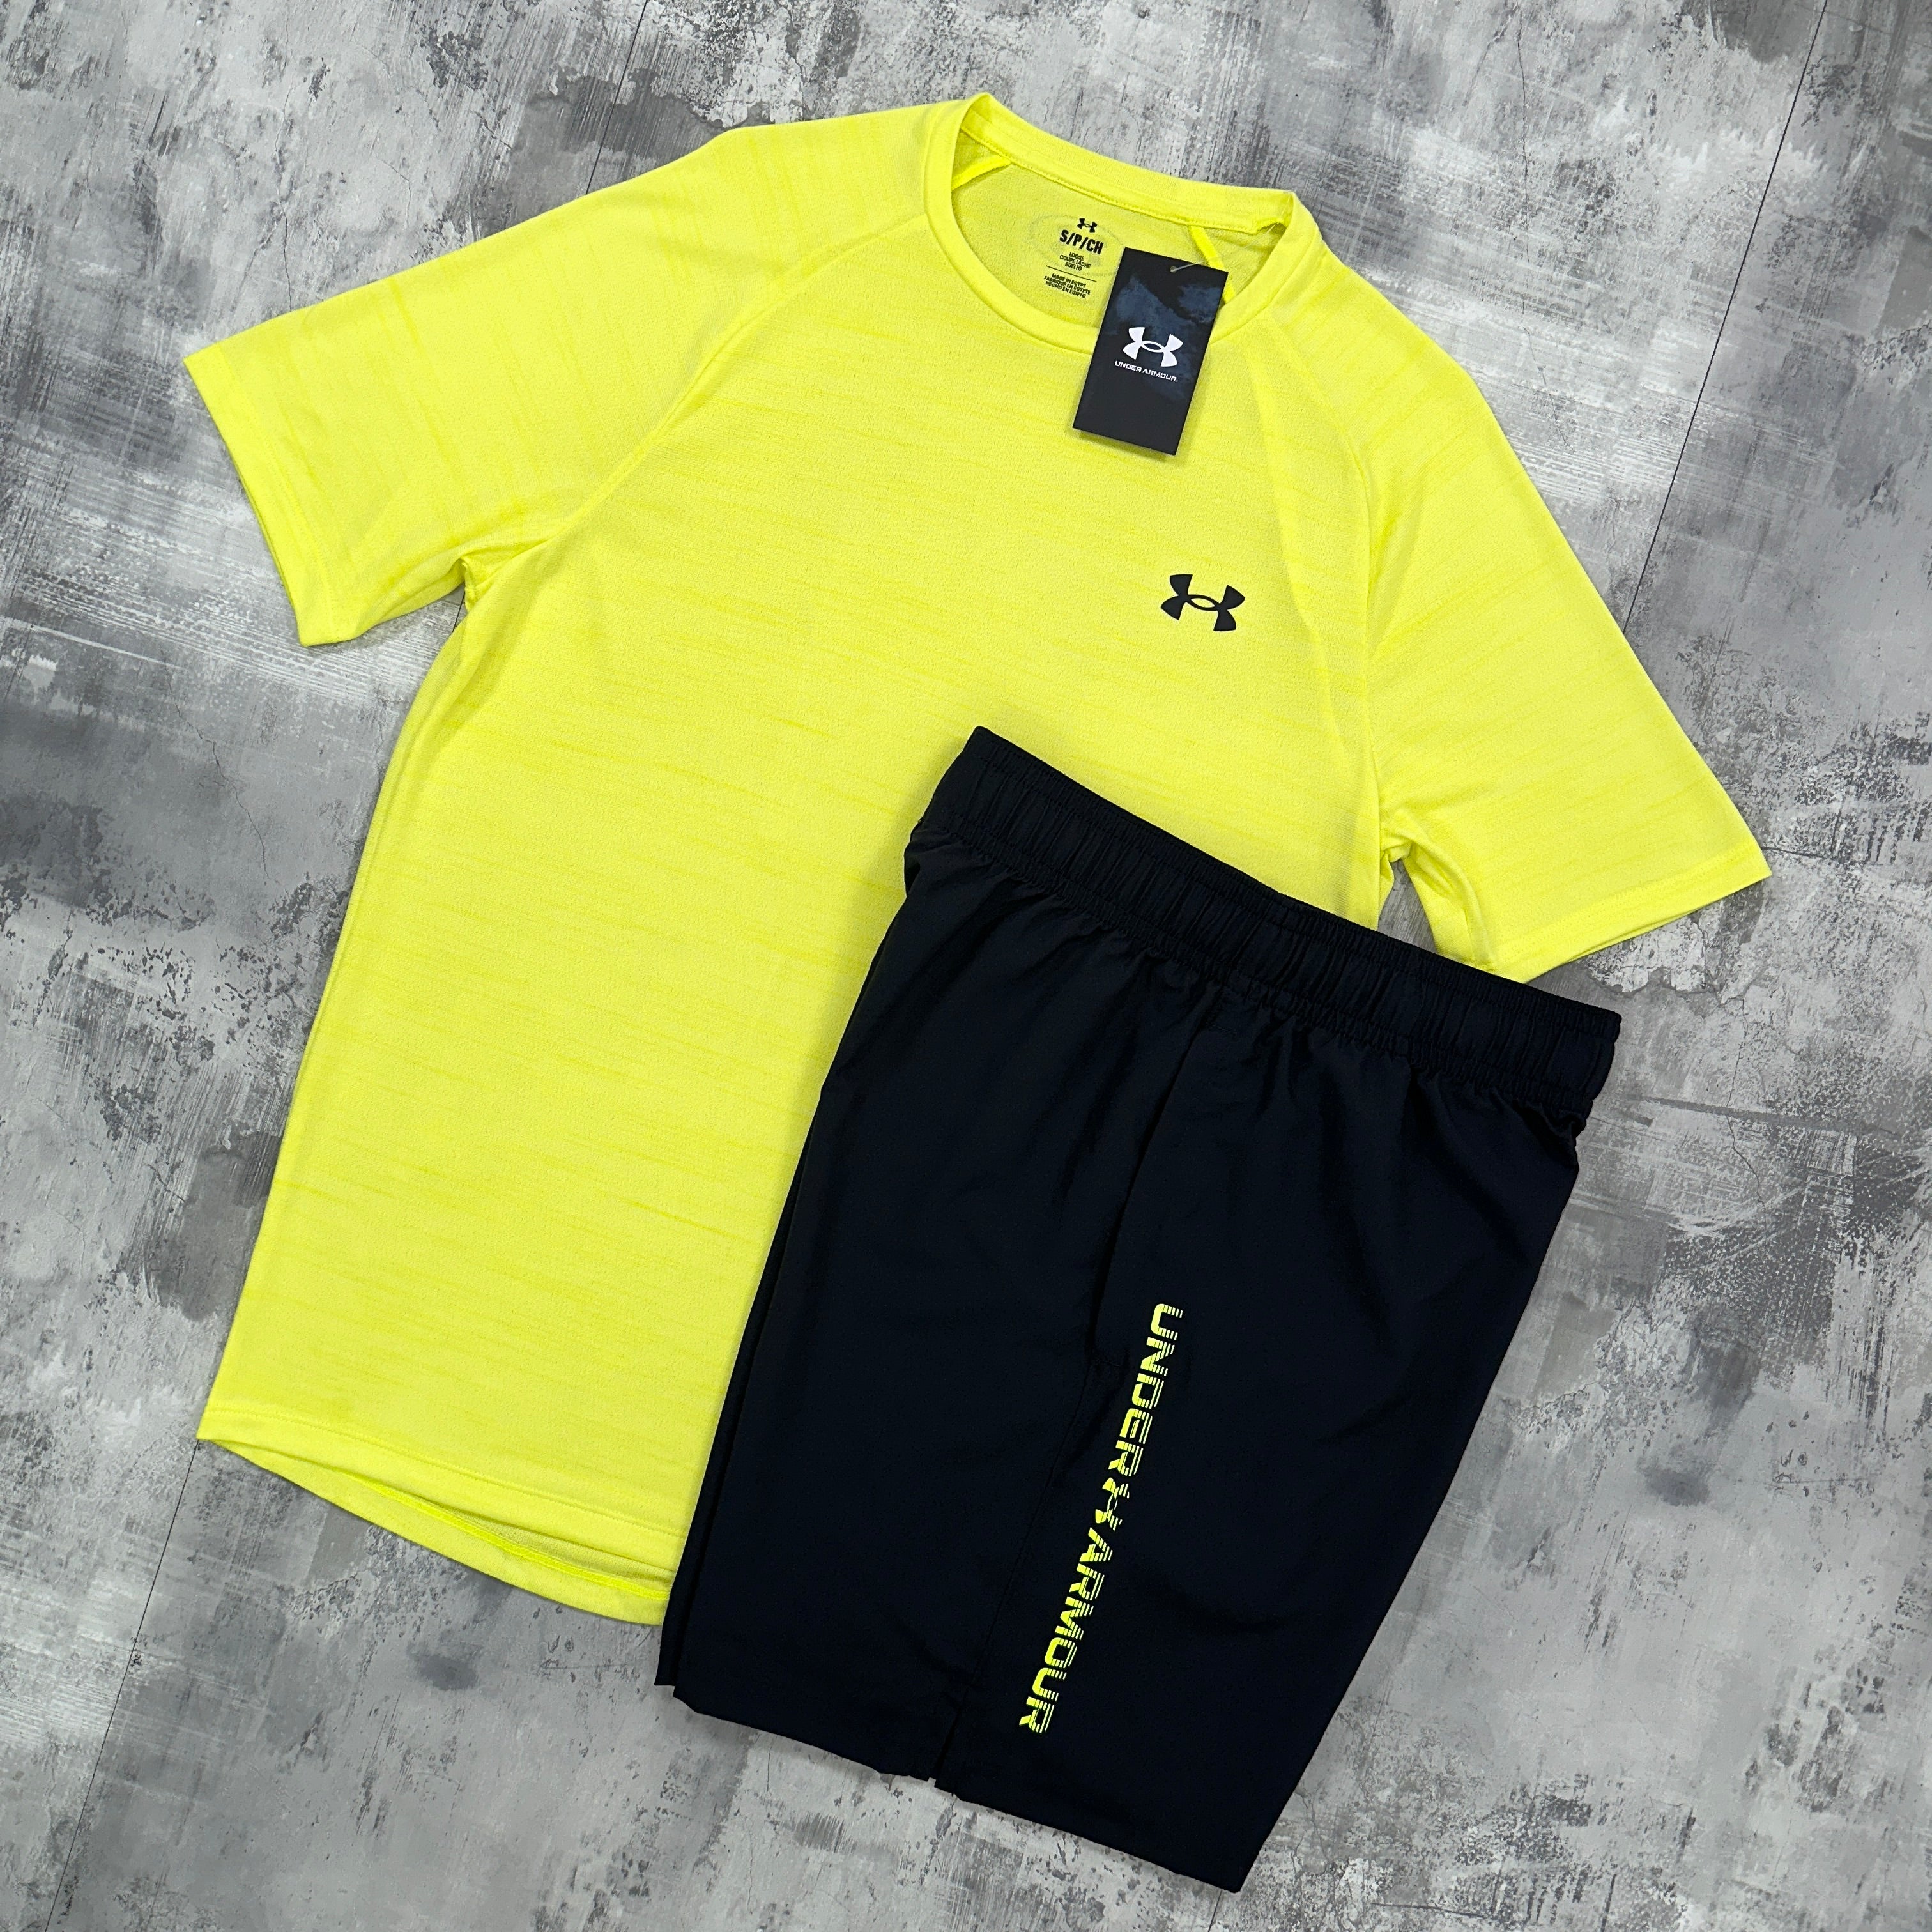 Under Armour Launch set Neon - t-shirt and shorts